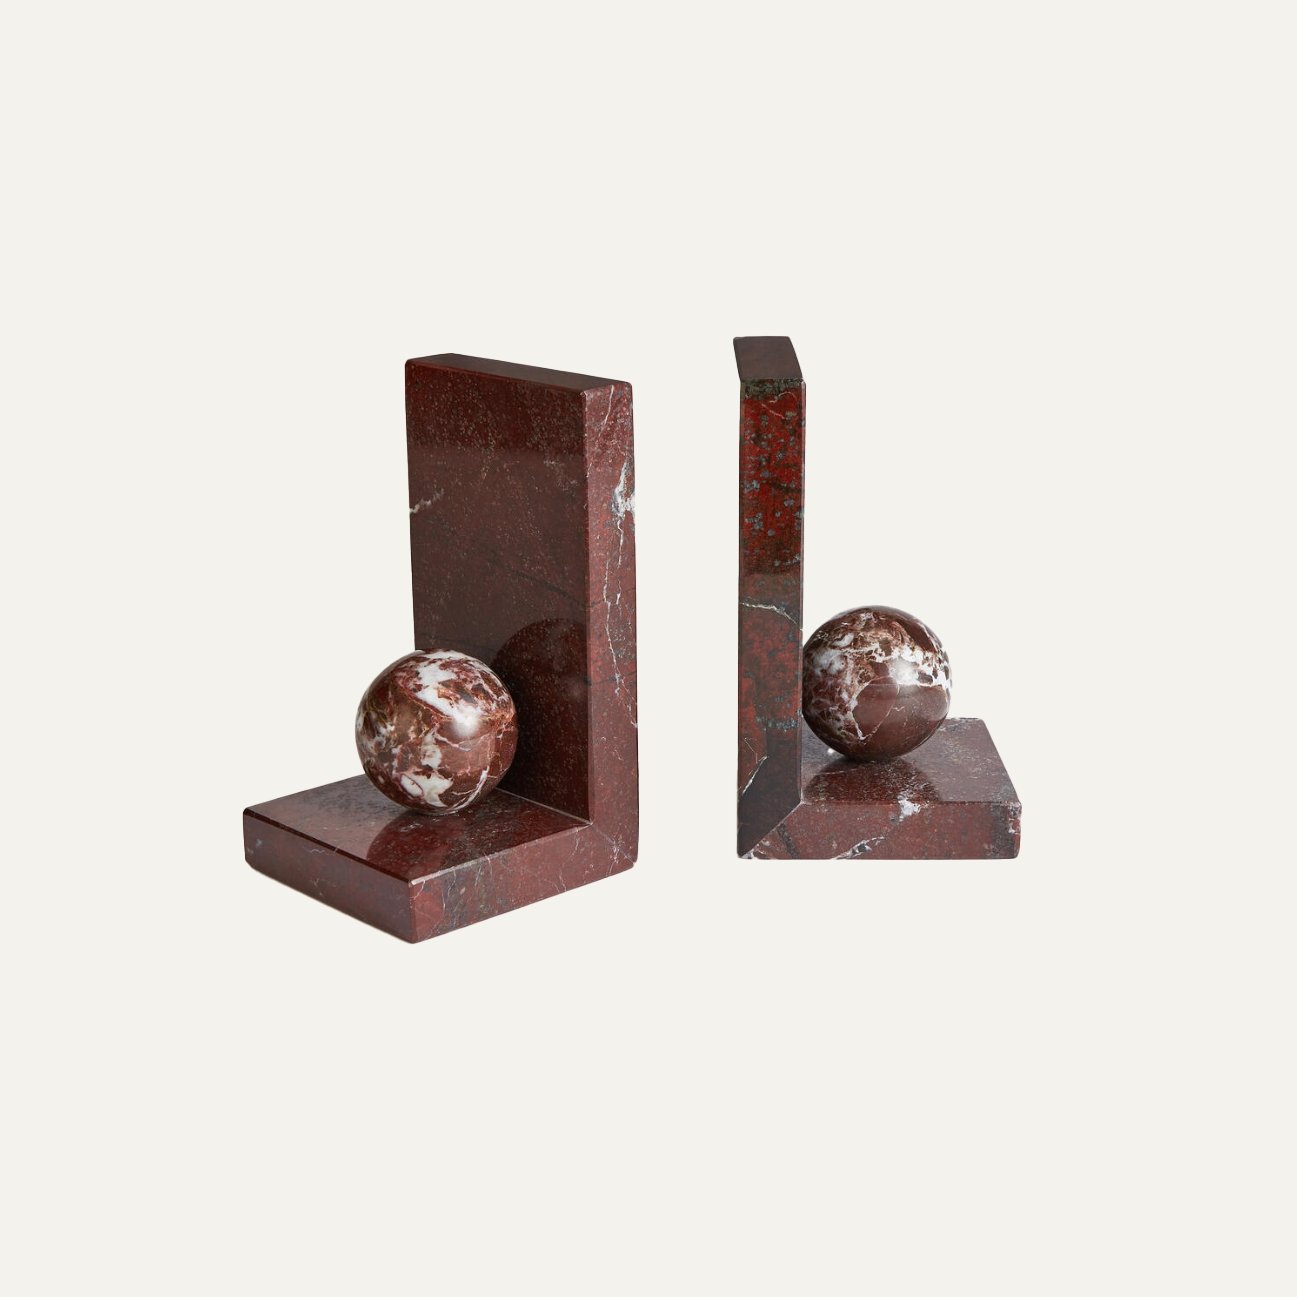 Prato Bookends by Soho Home